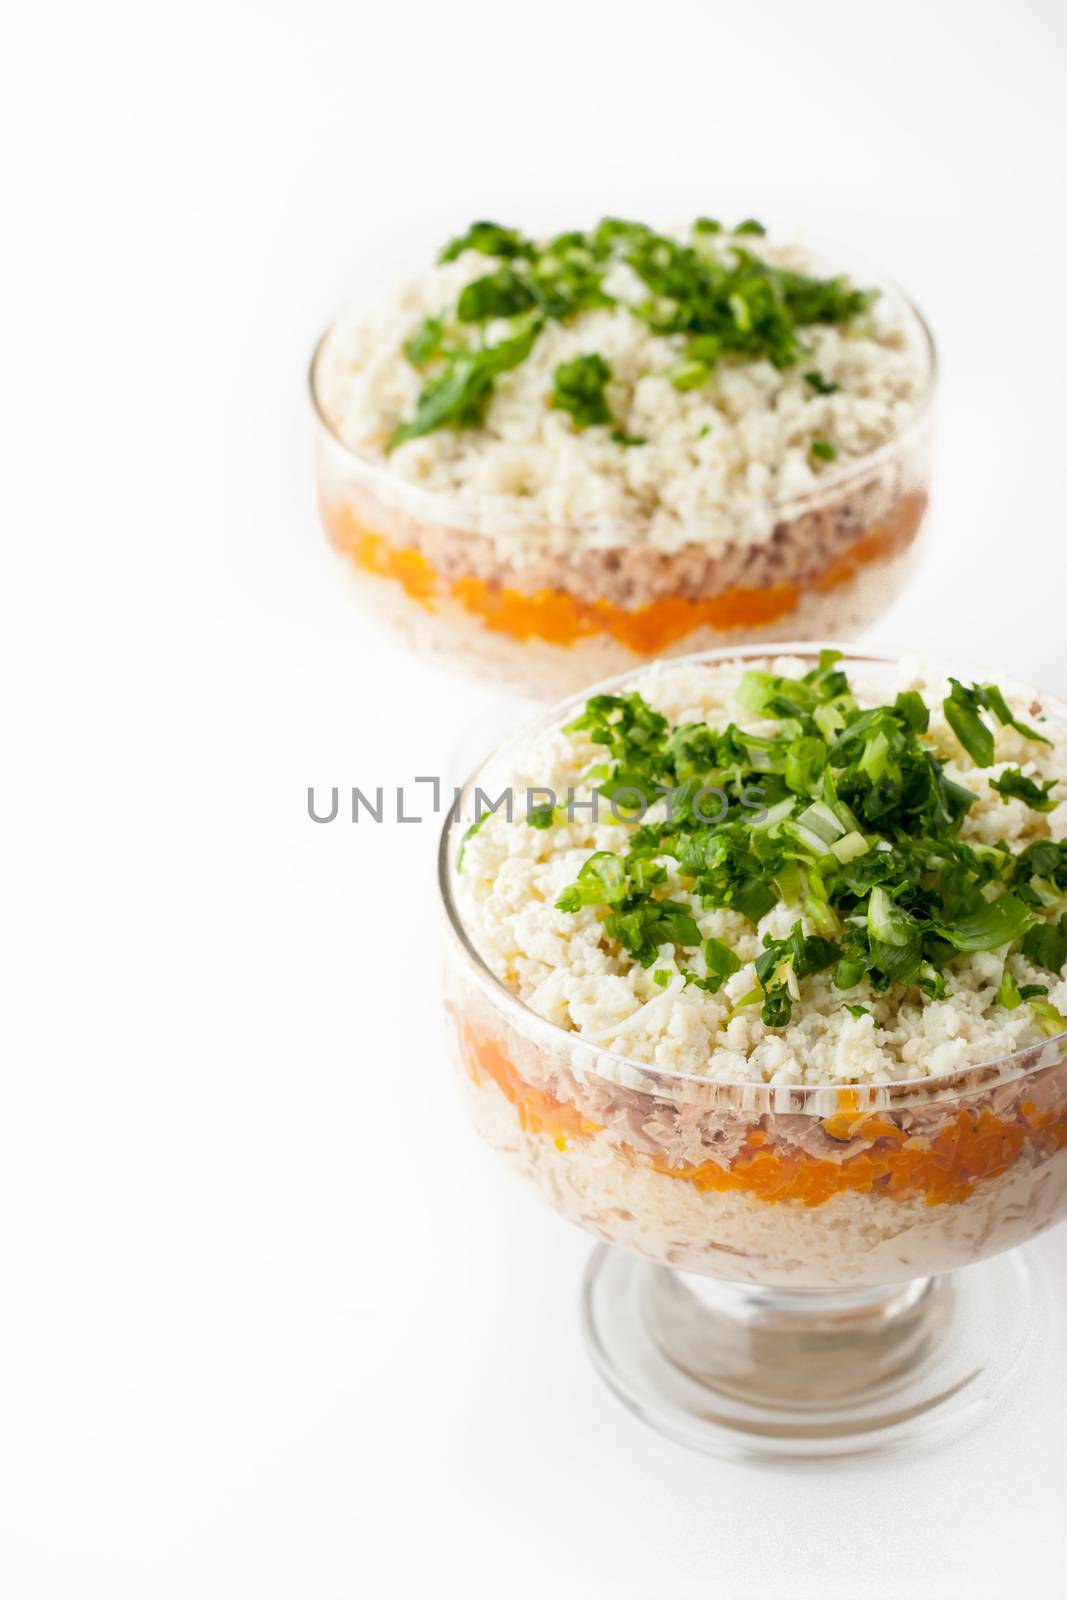 Layered salad with eggs and fish on the glass dish vertical